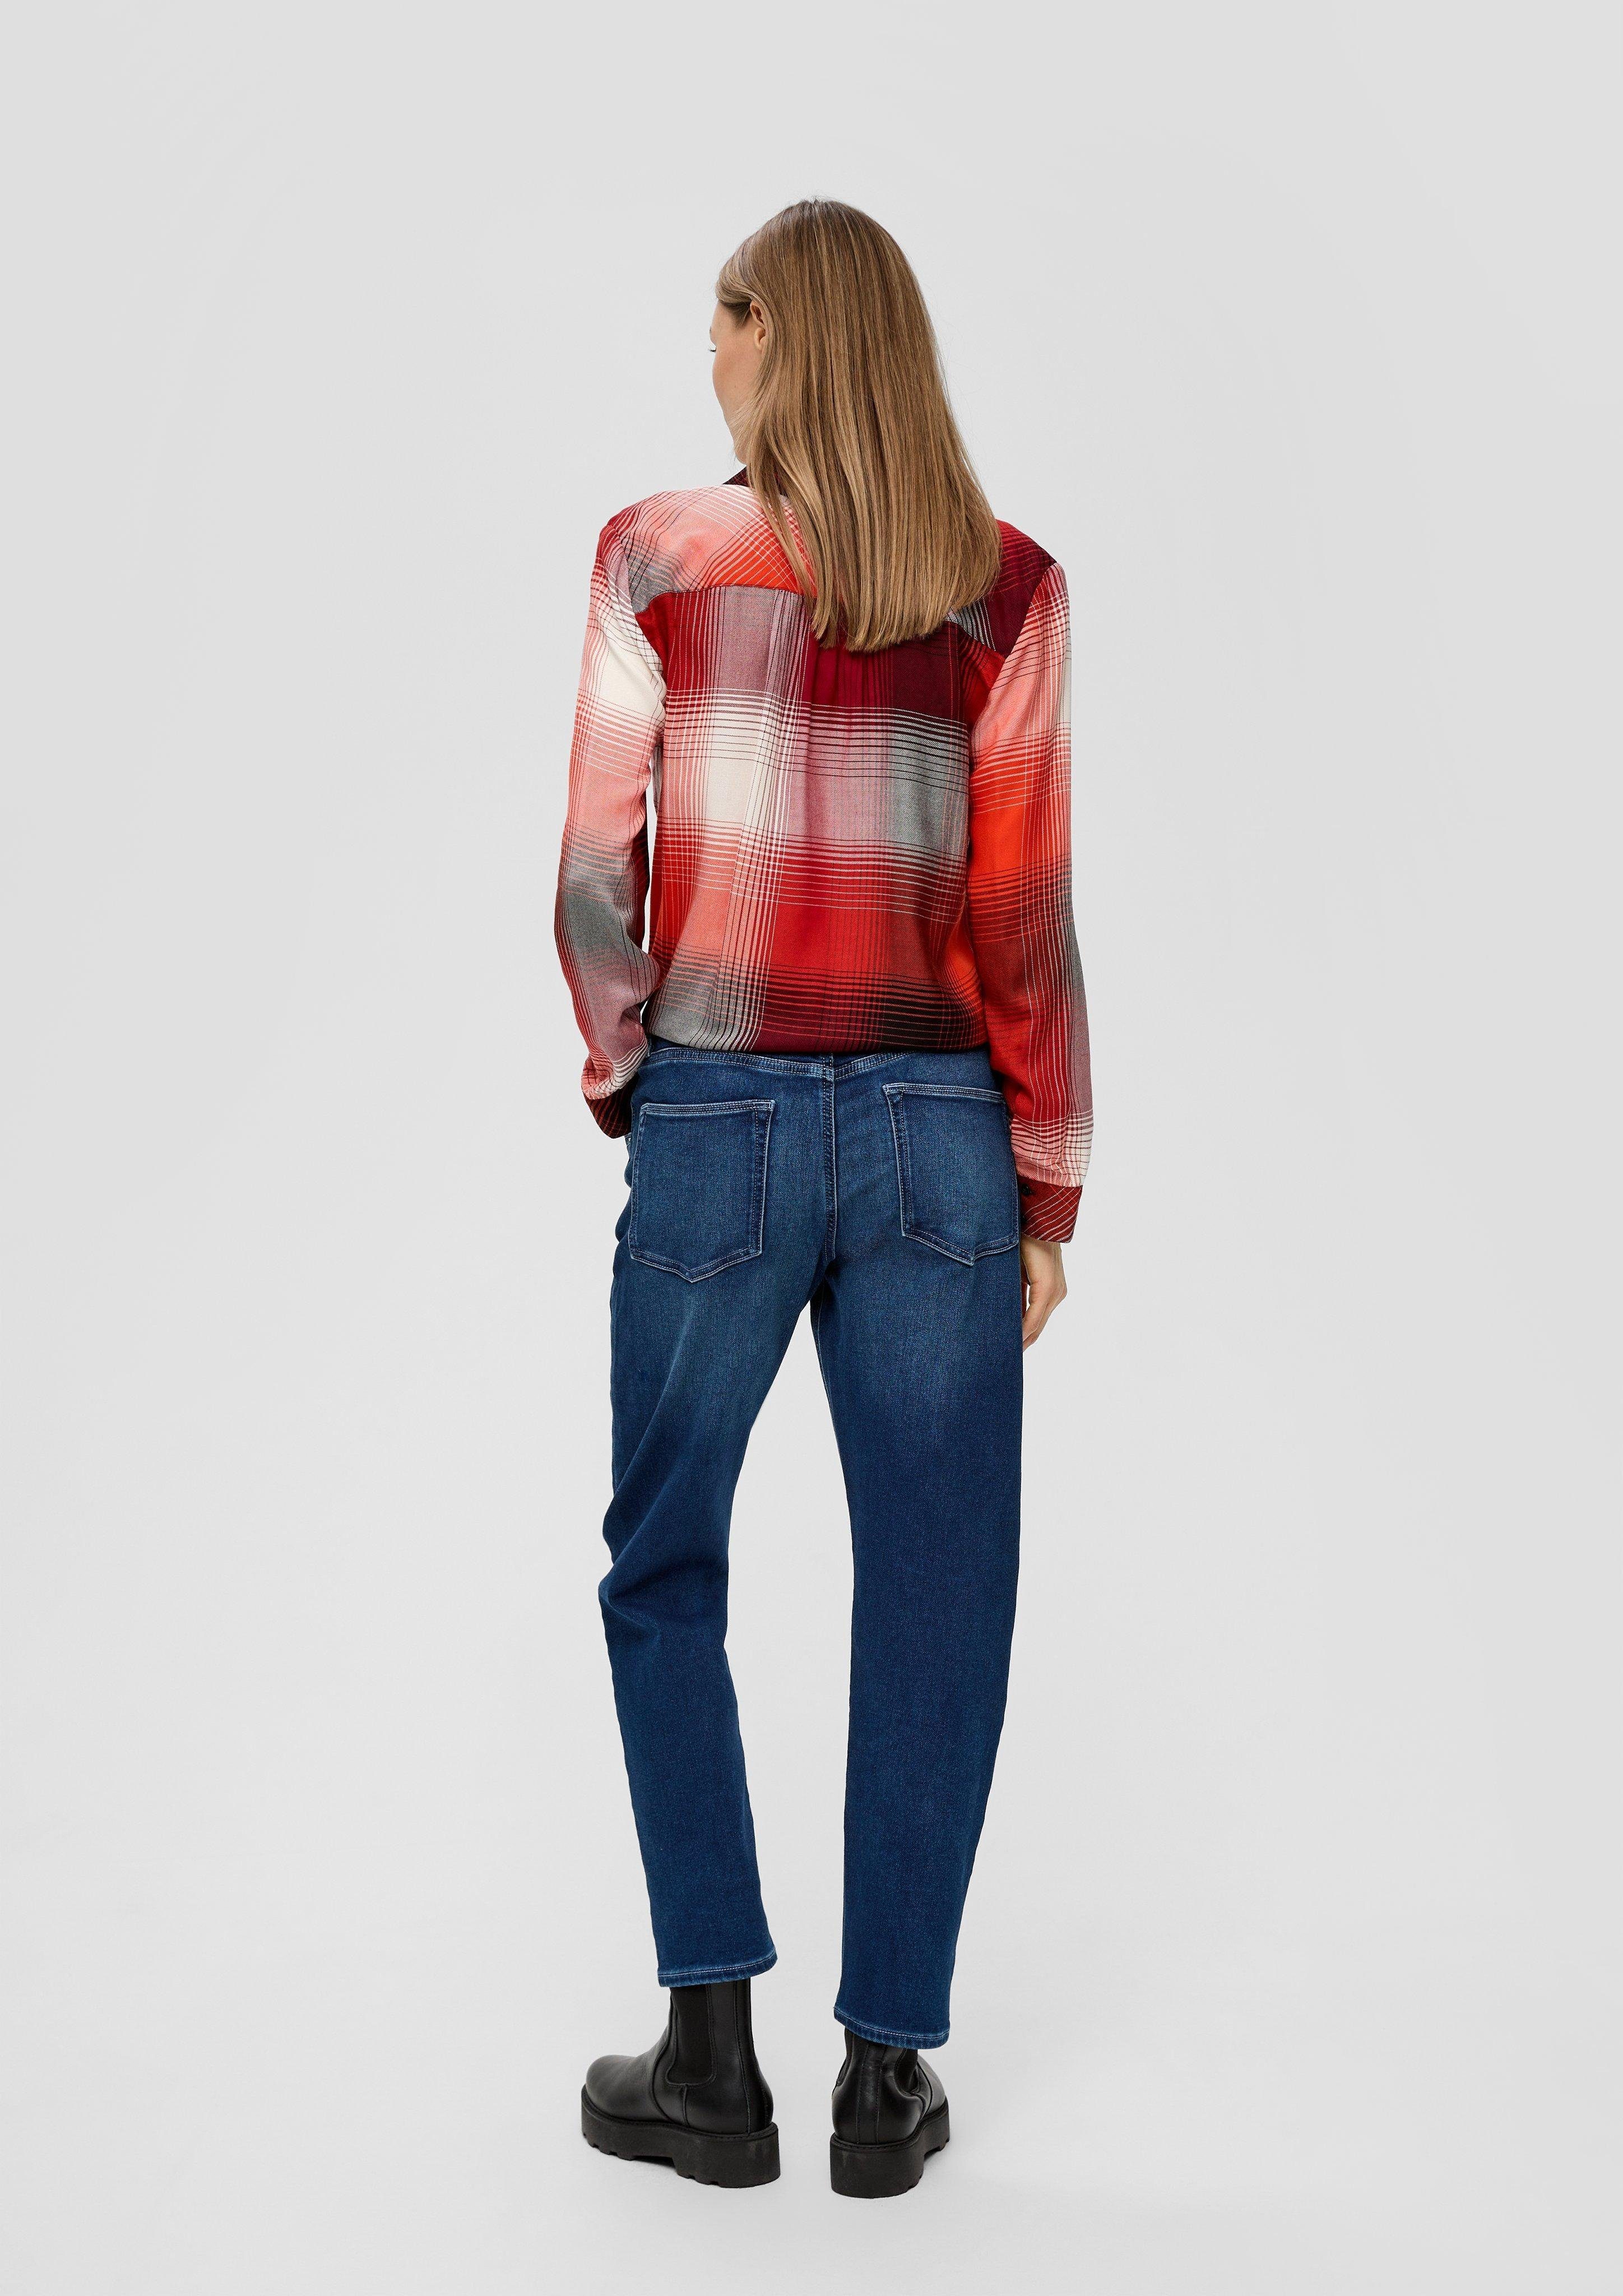 Fit Ankle Tapered Mid Boyfriend / / Leg Label-Patch, Ziernaht Slim Relaxed Rise s.Oliver Jeans / 7/8-Jeans